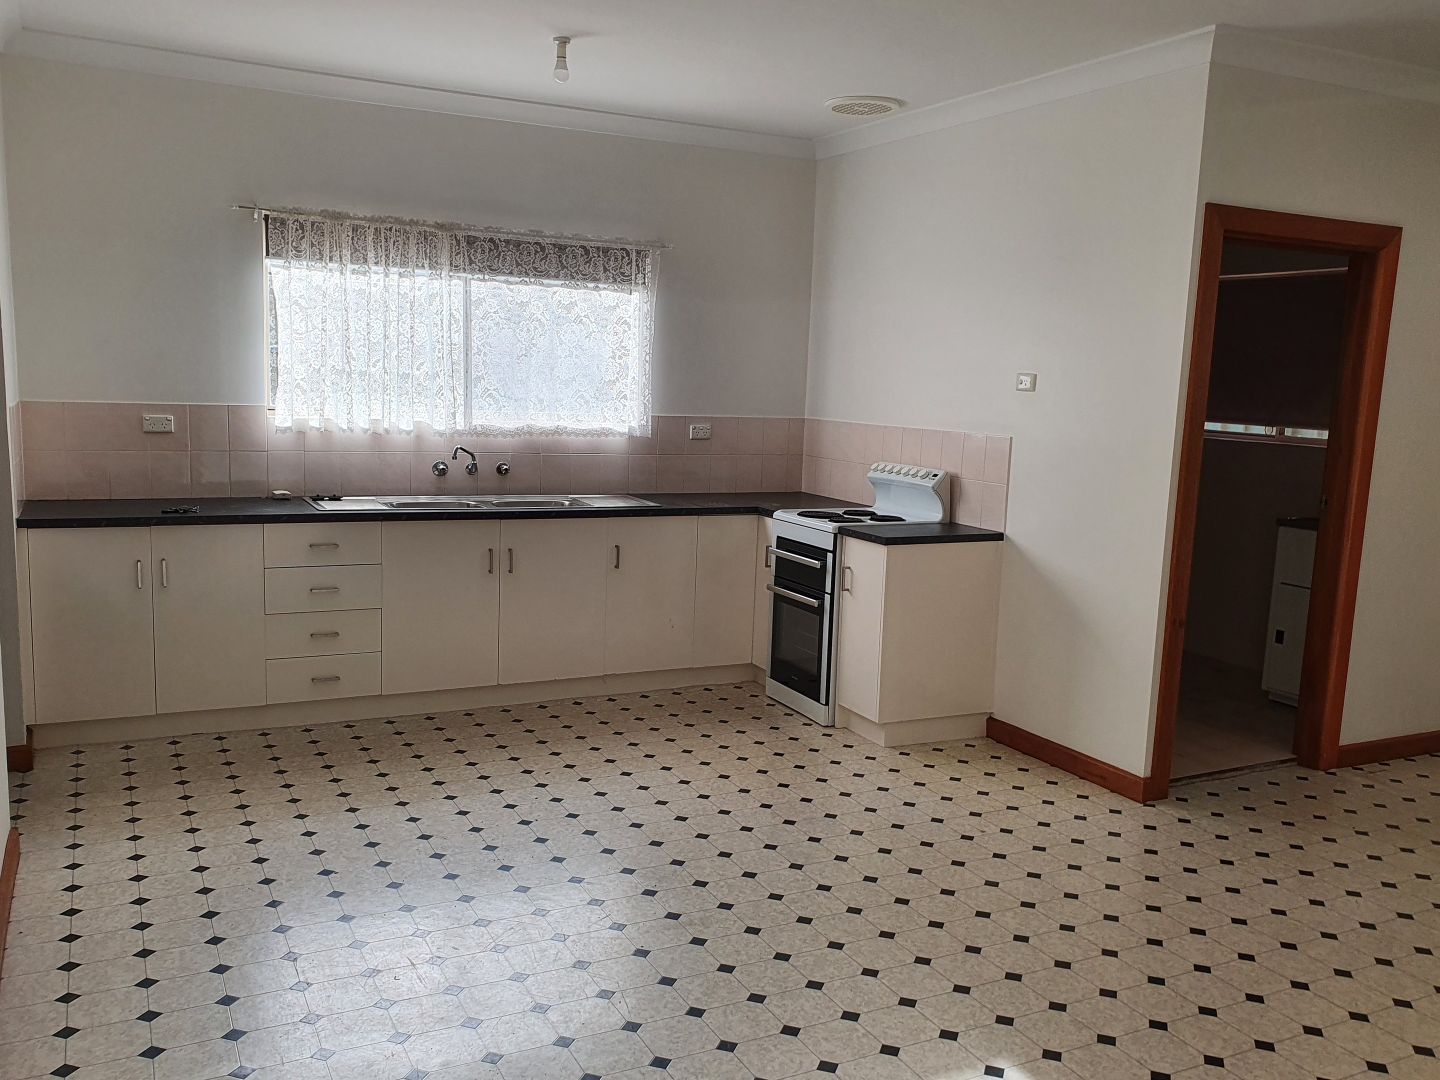 9 / 272 WHITES ROAD, Paralowie SA 5108, Image 2